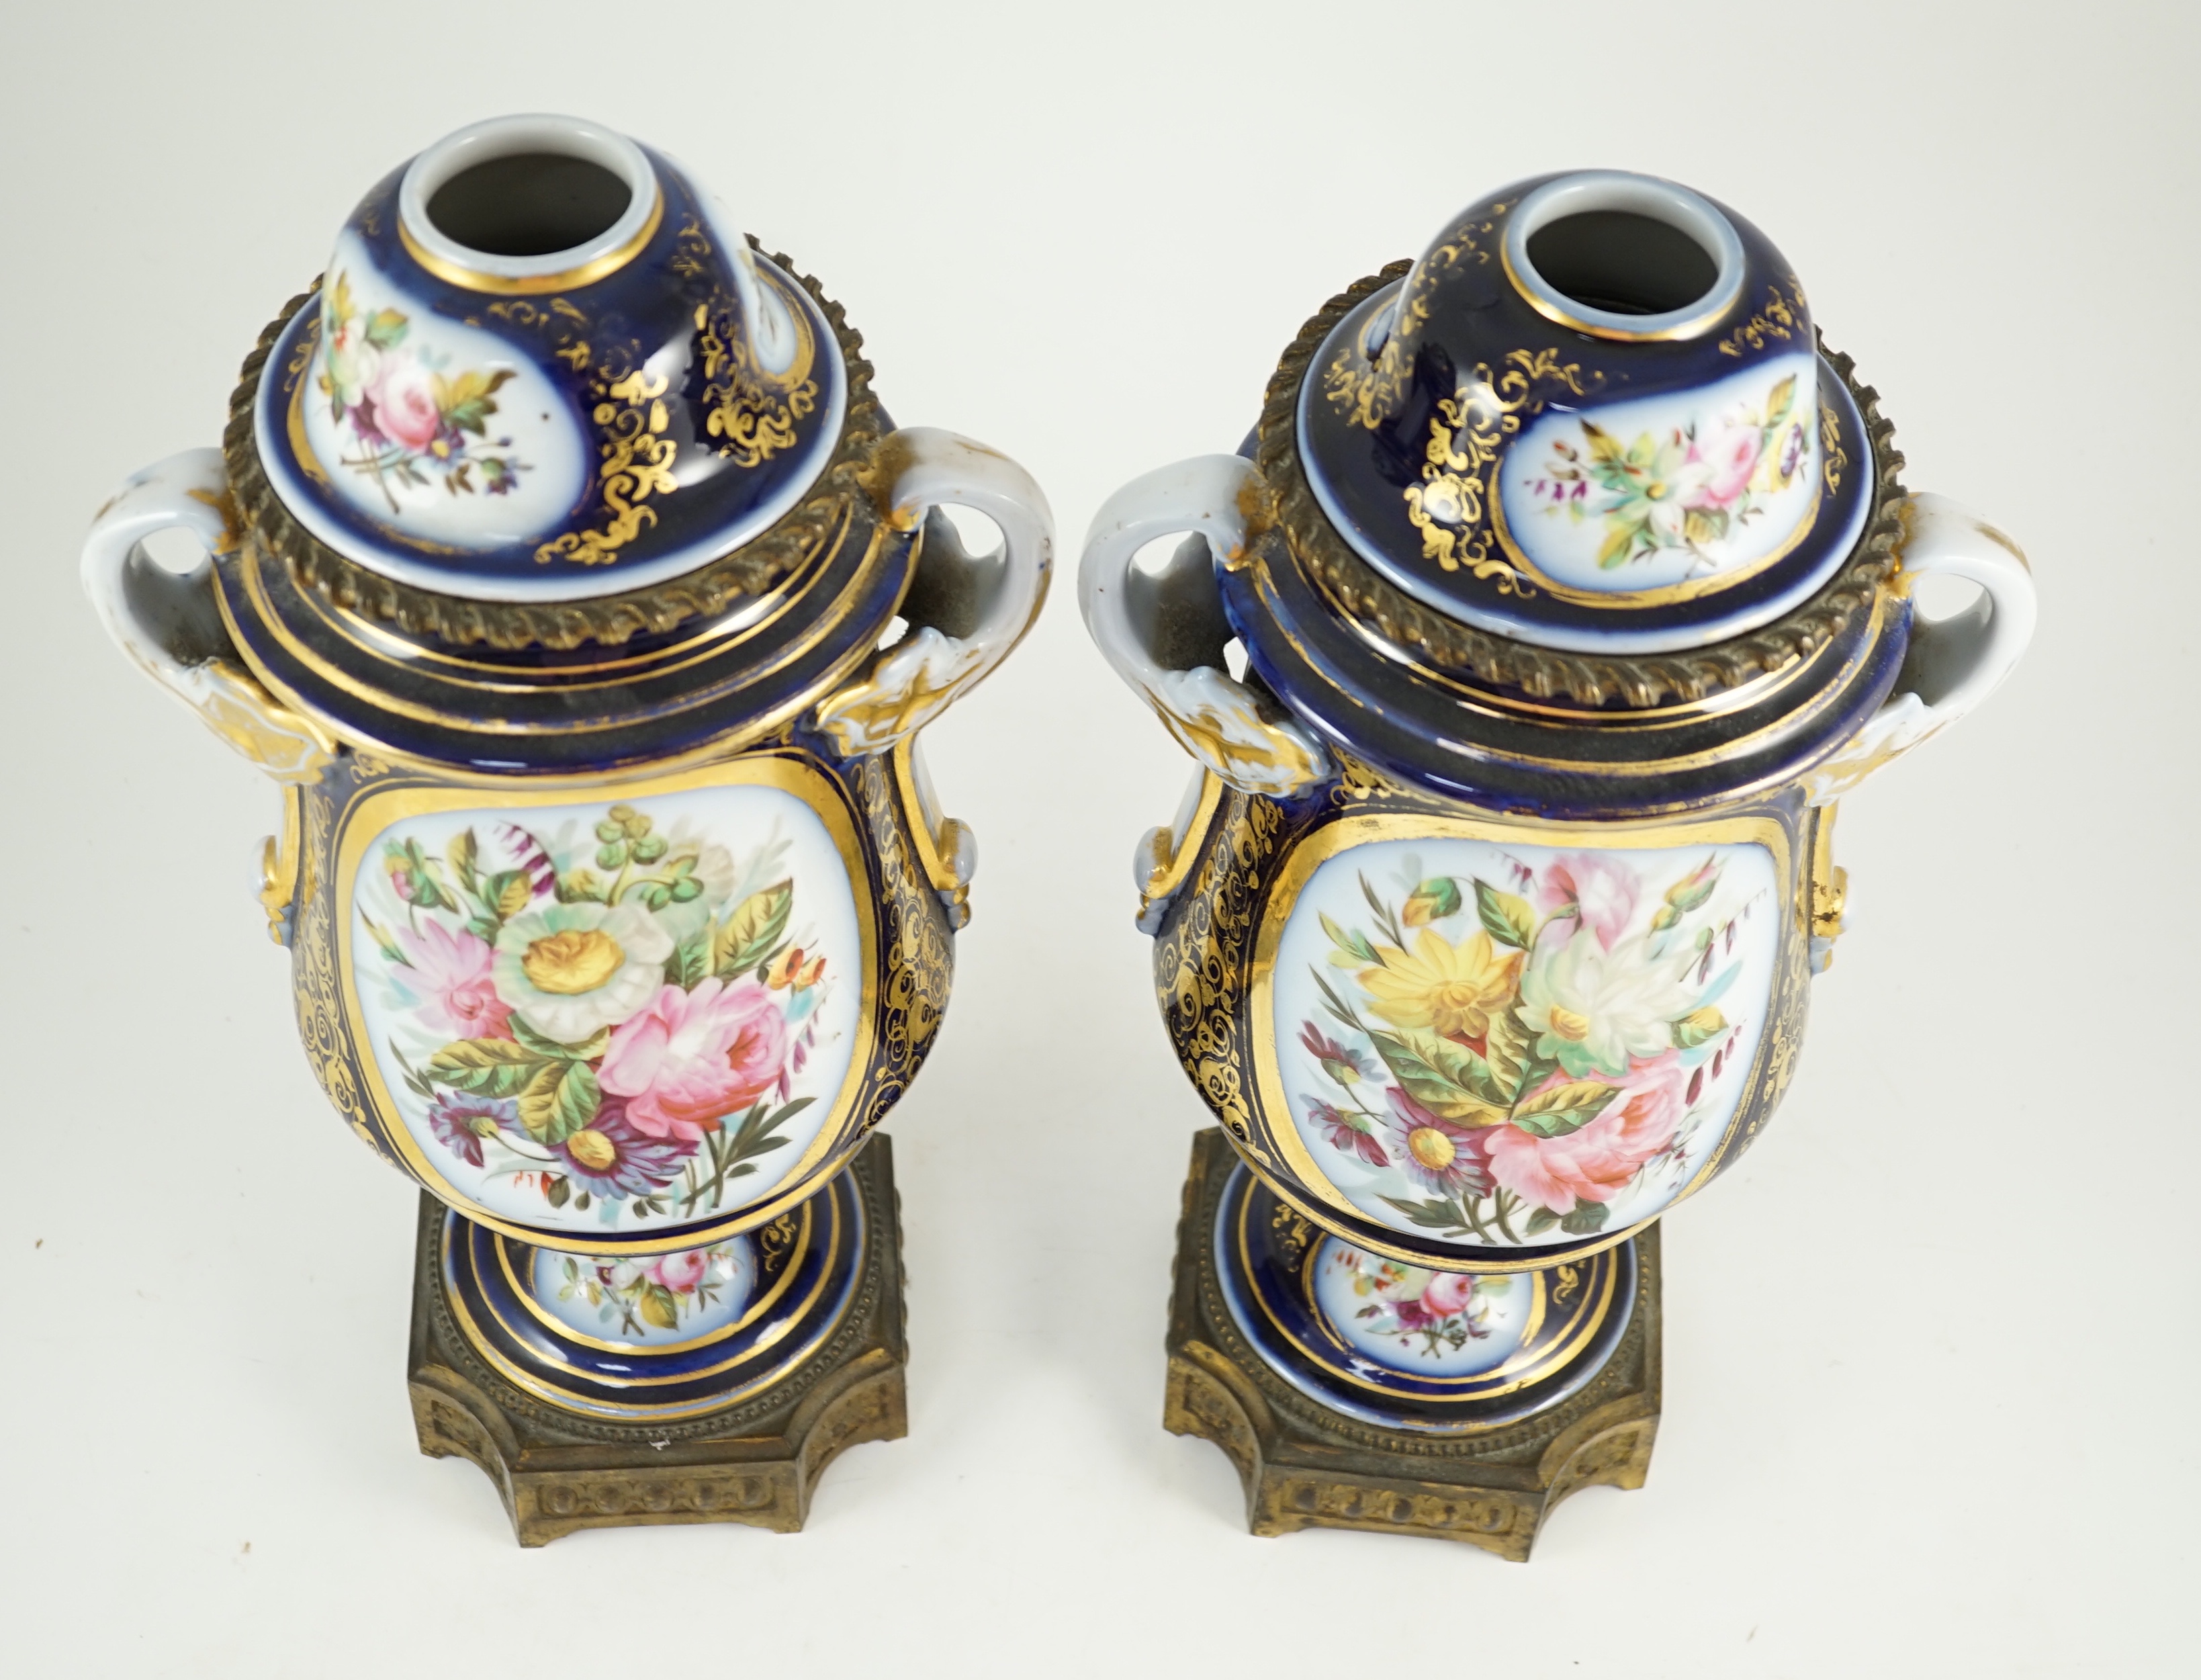 A pair of Sevres style Paris porcelain and ormolu mounted oil lamps, late 19th century, 43 cm high